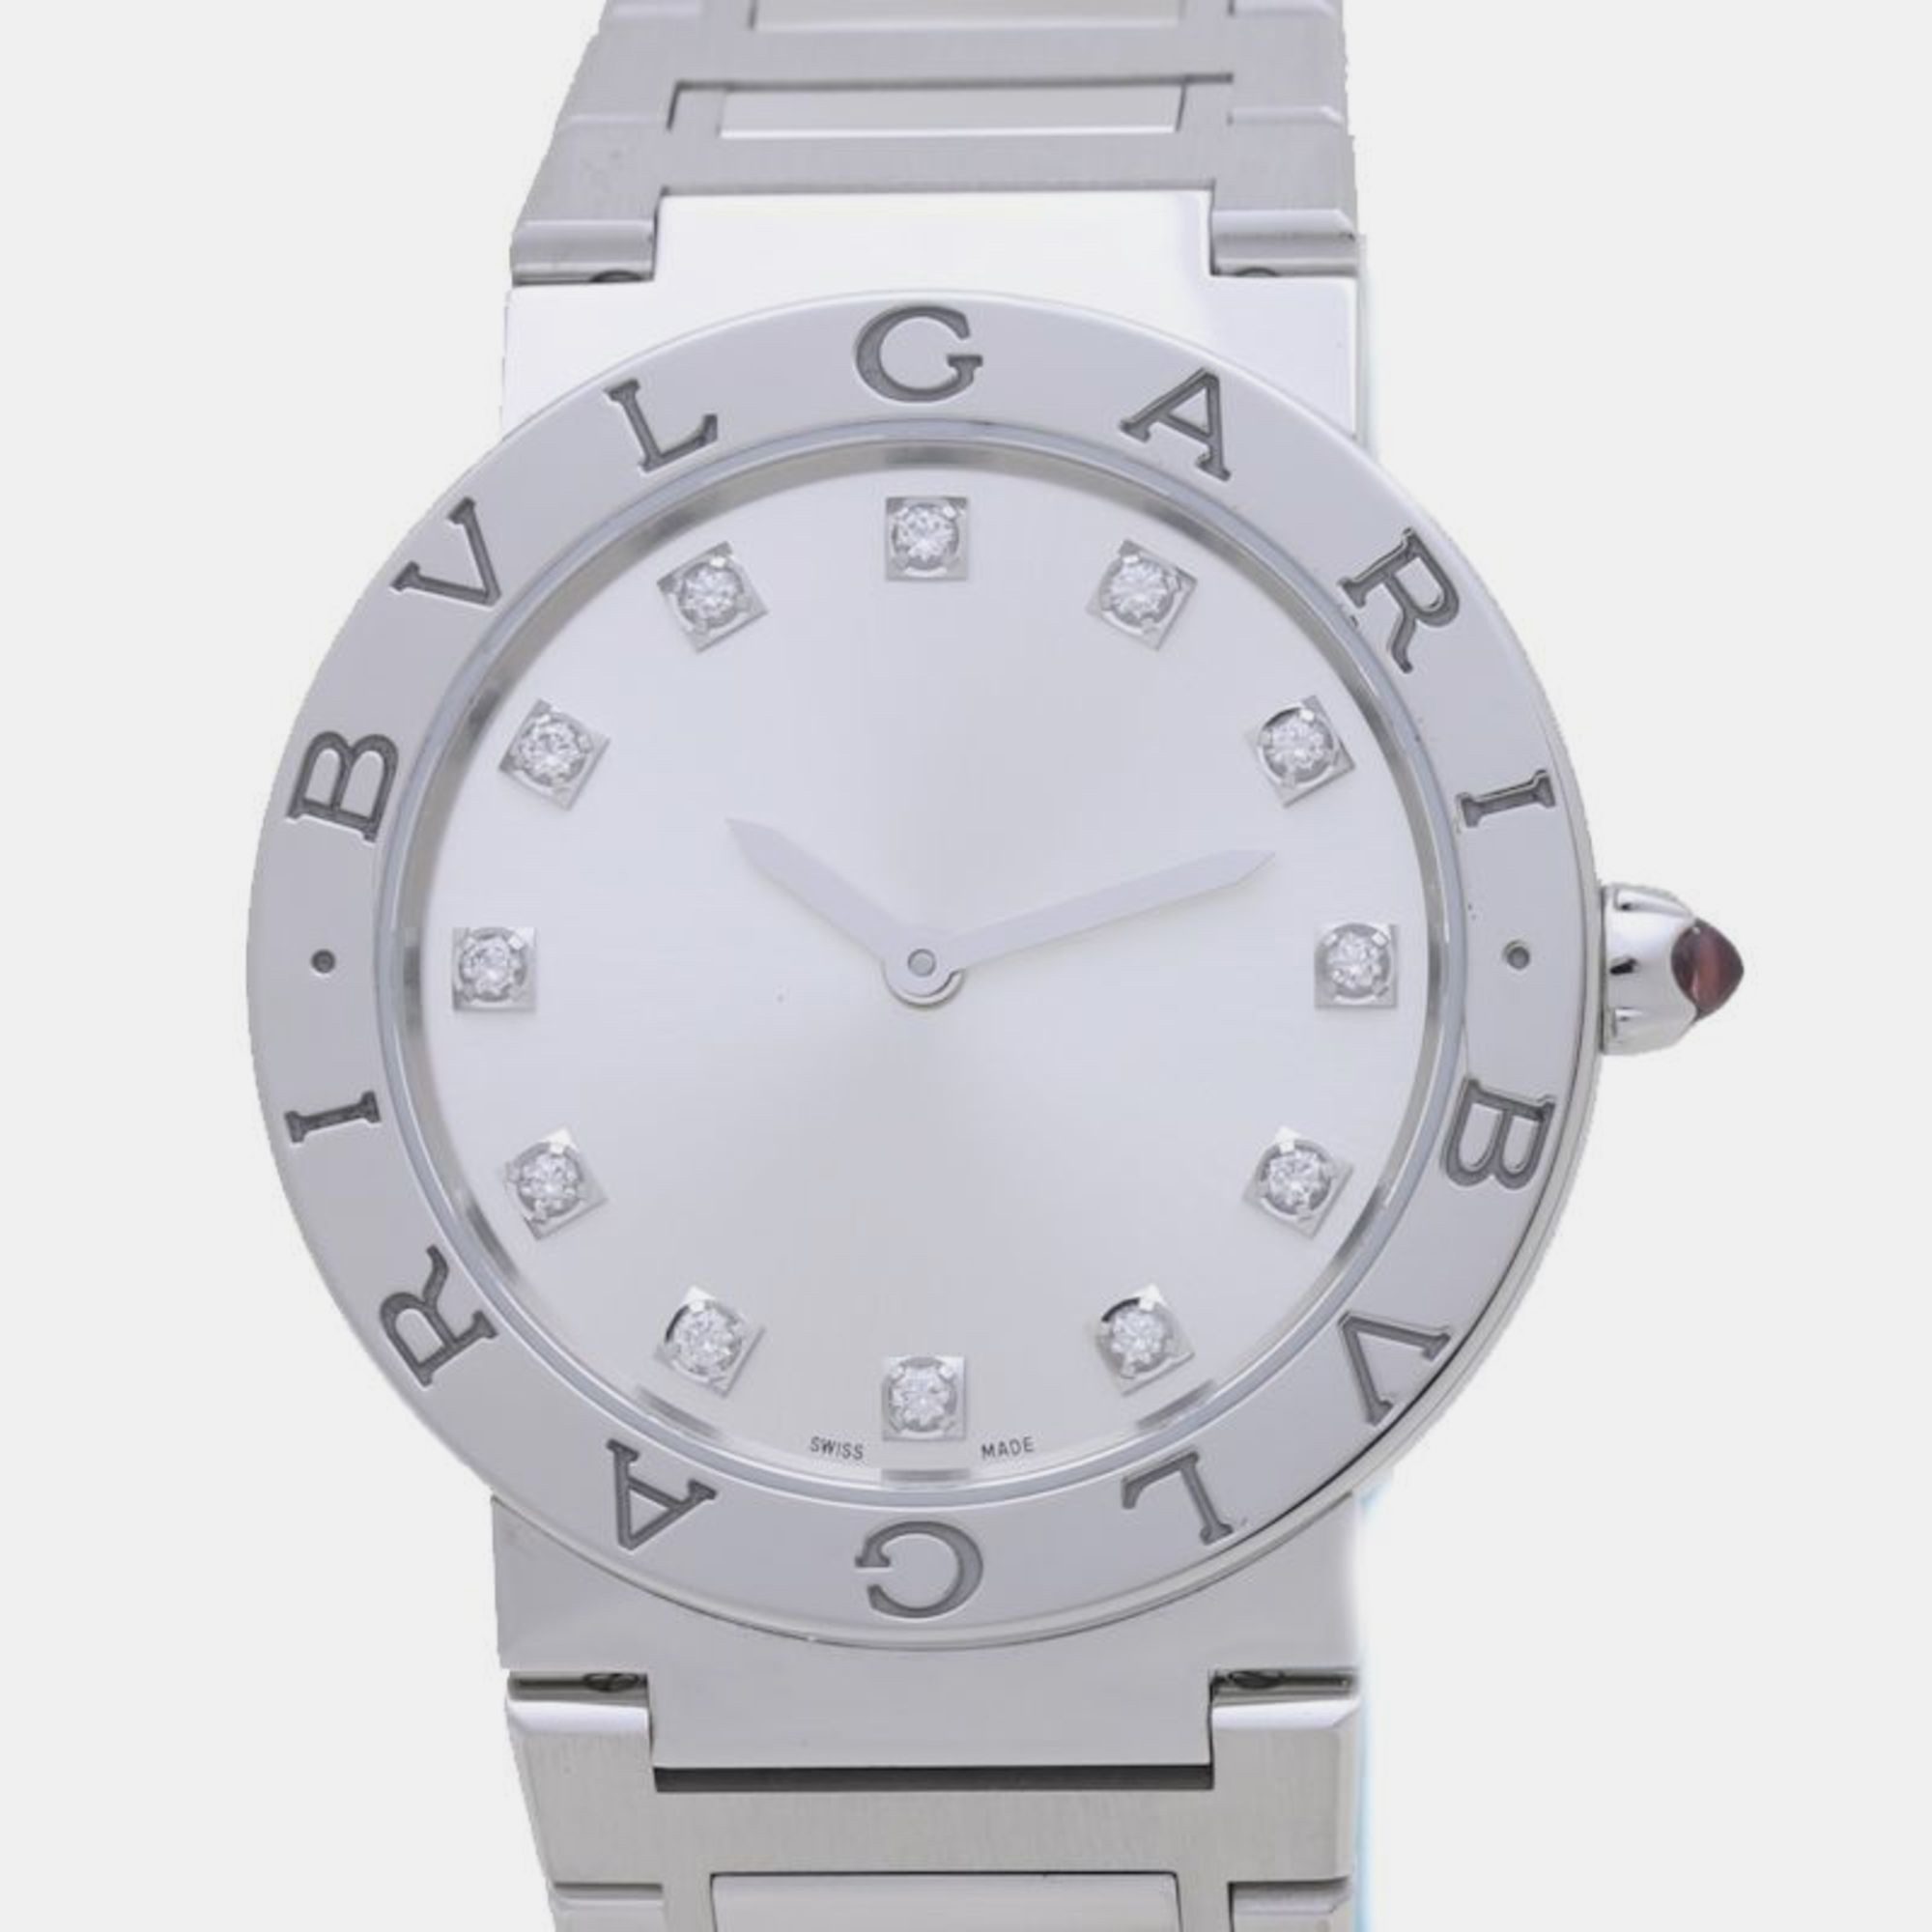 This authentic Bvlgari watch is characterized by skillful craftsmanship and understated charm. Meticulously constructed to tell time in an elegant way it comes in a sturdy case and flaunts a seamless blend of innovative design and flawless style.